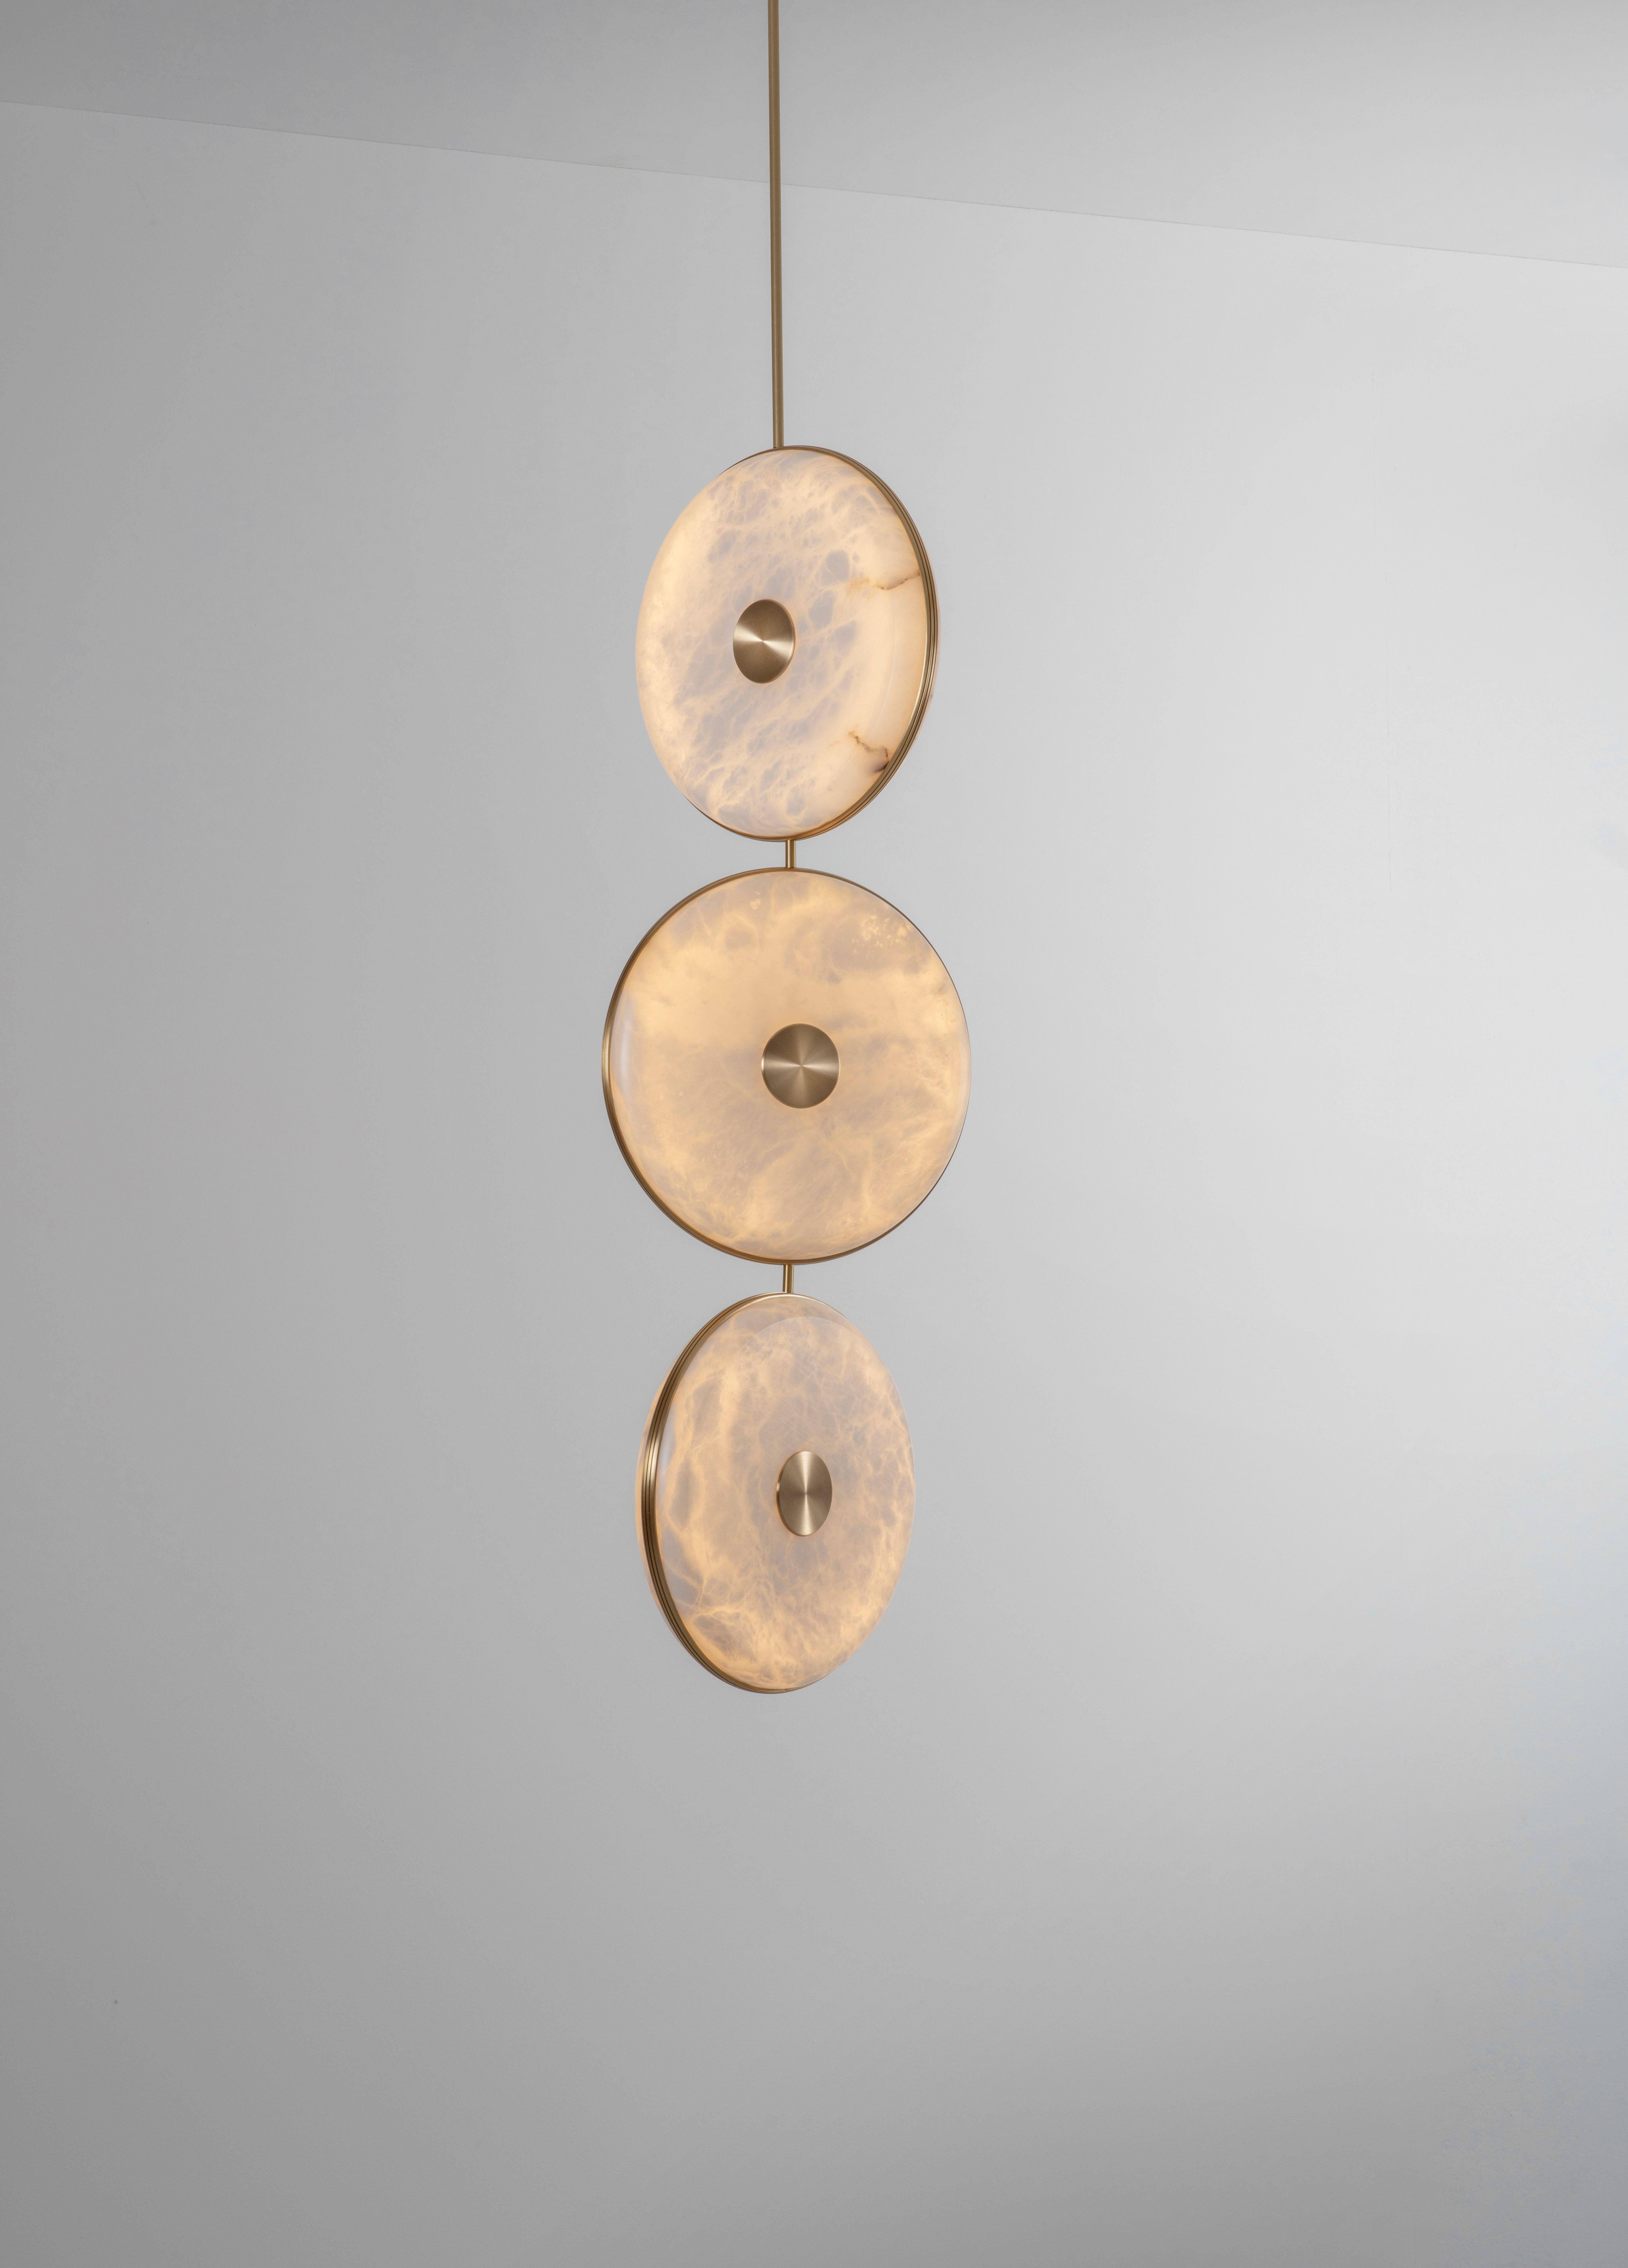 Beran Brushed Brass Large Drop 3 Chandelier by Bert Frank
Dimensions: Ø 36 x H 100 cm. 
Materials: Brass and alabaster.

Available in two different sizes. Available in different finishes and materials: Brushed brass, Antique brass, Dark bronze and